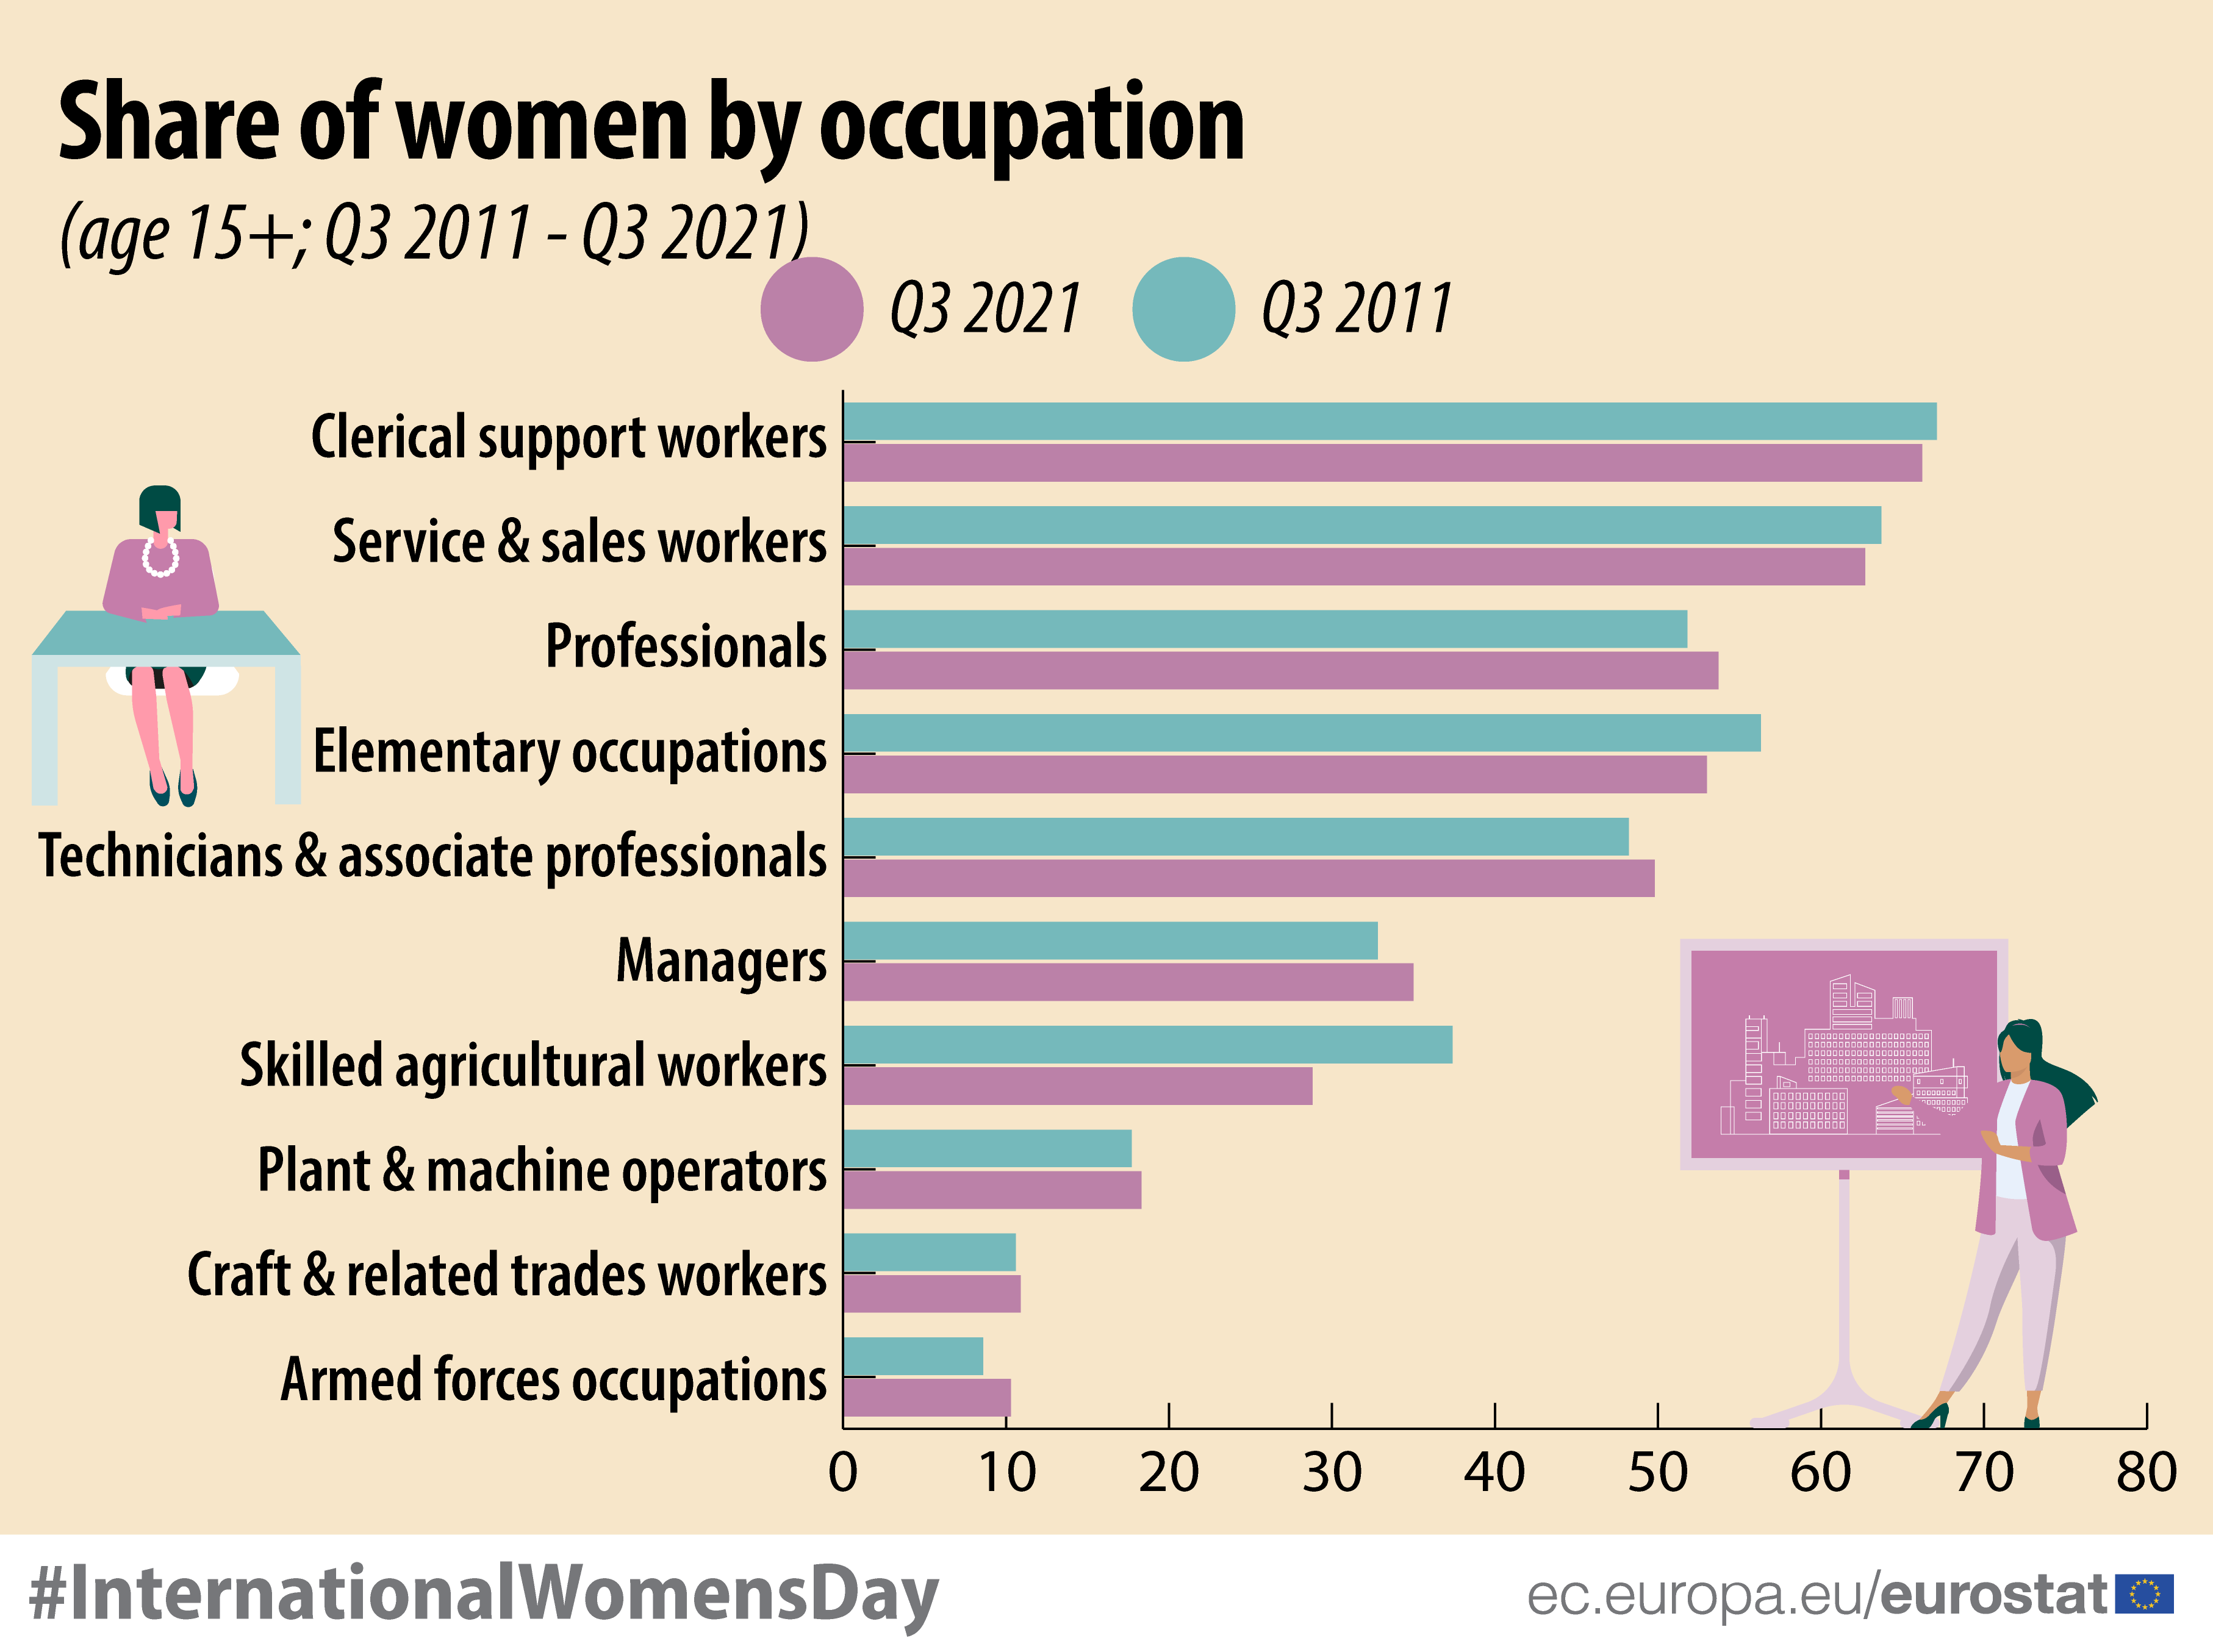 Share of women by occupation (age 15+; Q3 2021 - Q3 2011)